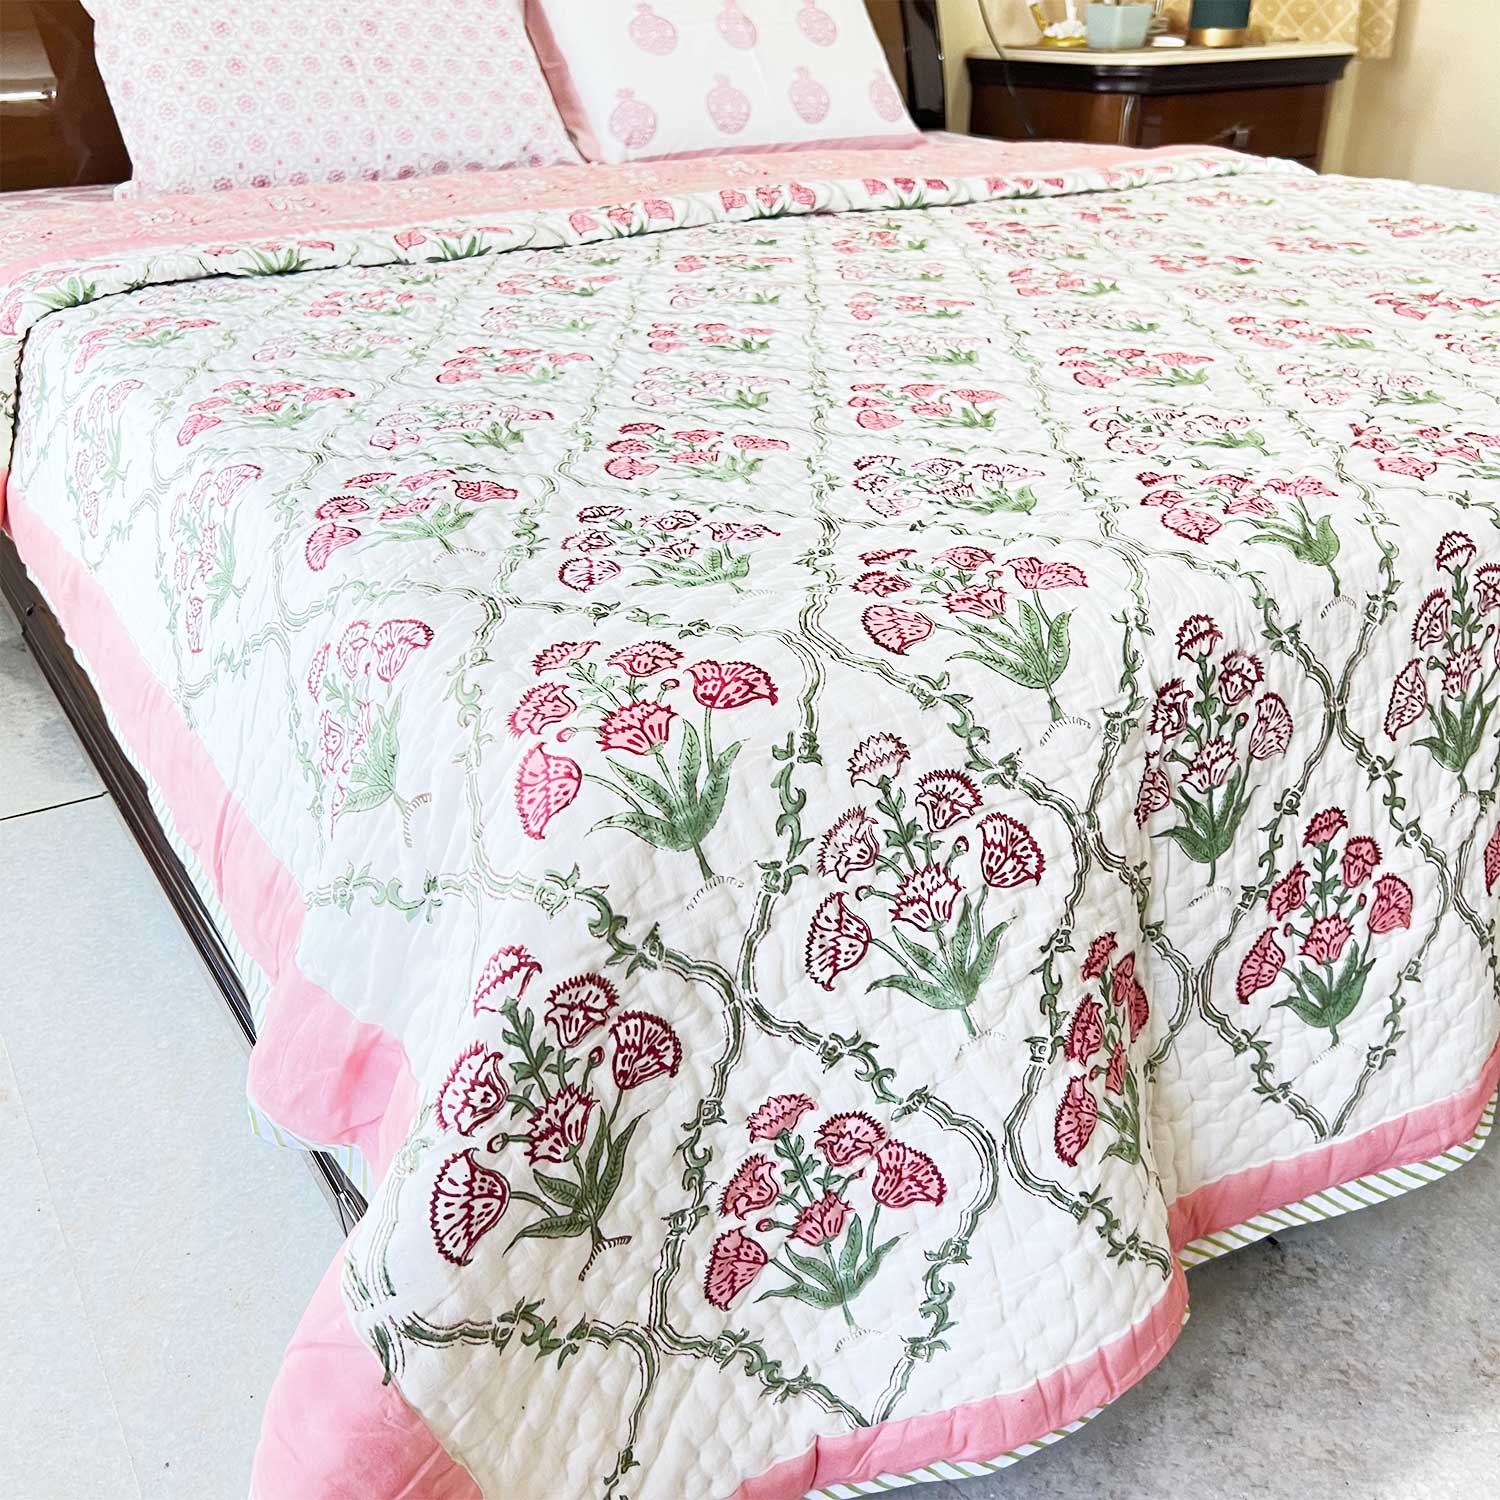 Pink  Floral  Block Printed Double sided Cotton Quilt - 90 inches x 108 inches